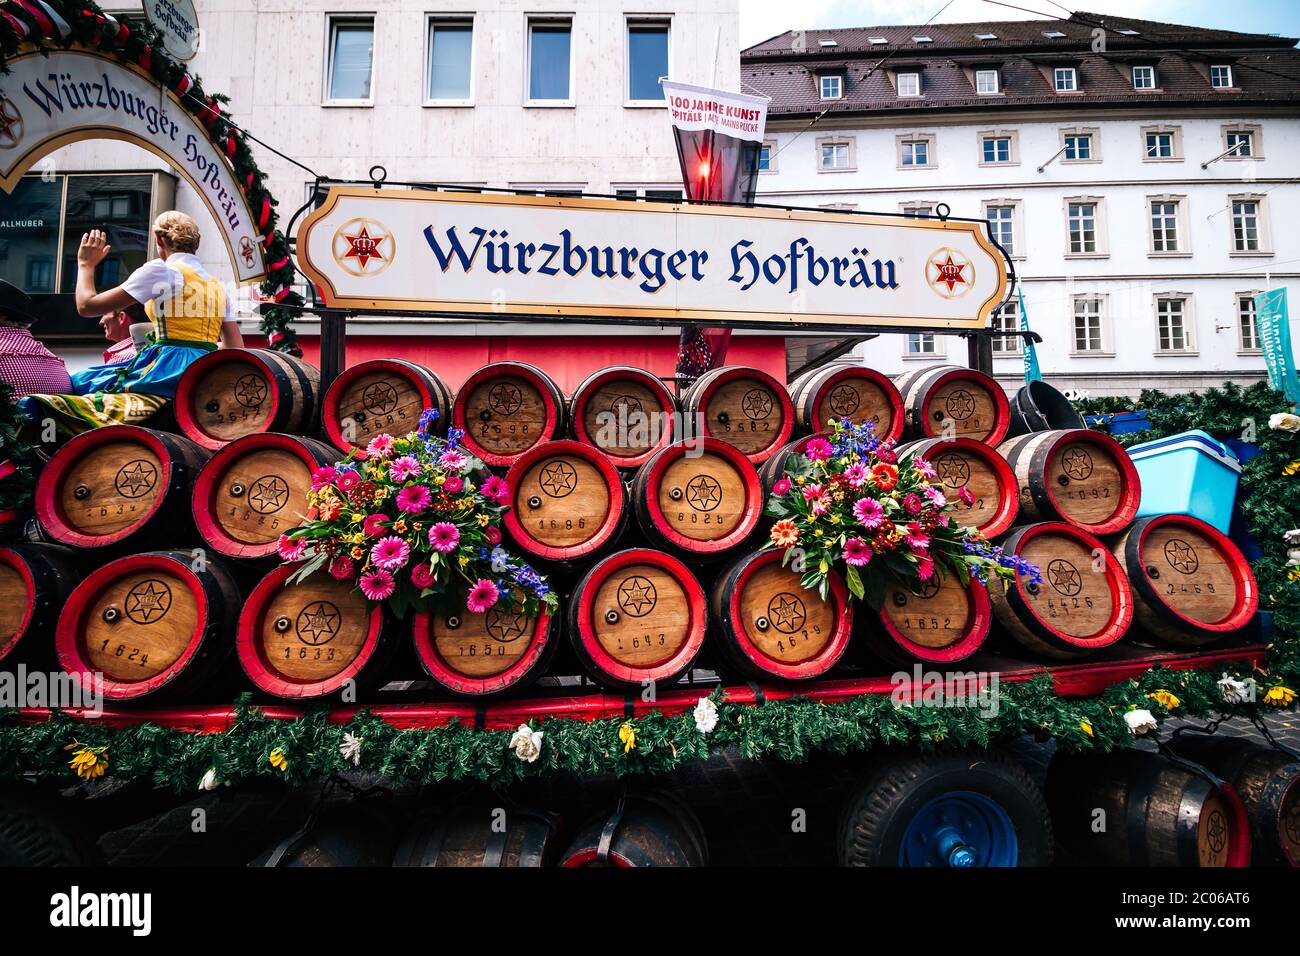 Decorted horse-drawn carriage with beer barrels from the traditional local brewery, Würzburger Hofbräu at the Kiliani summer festival opening parade Stock Photo